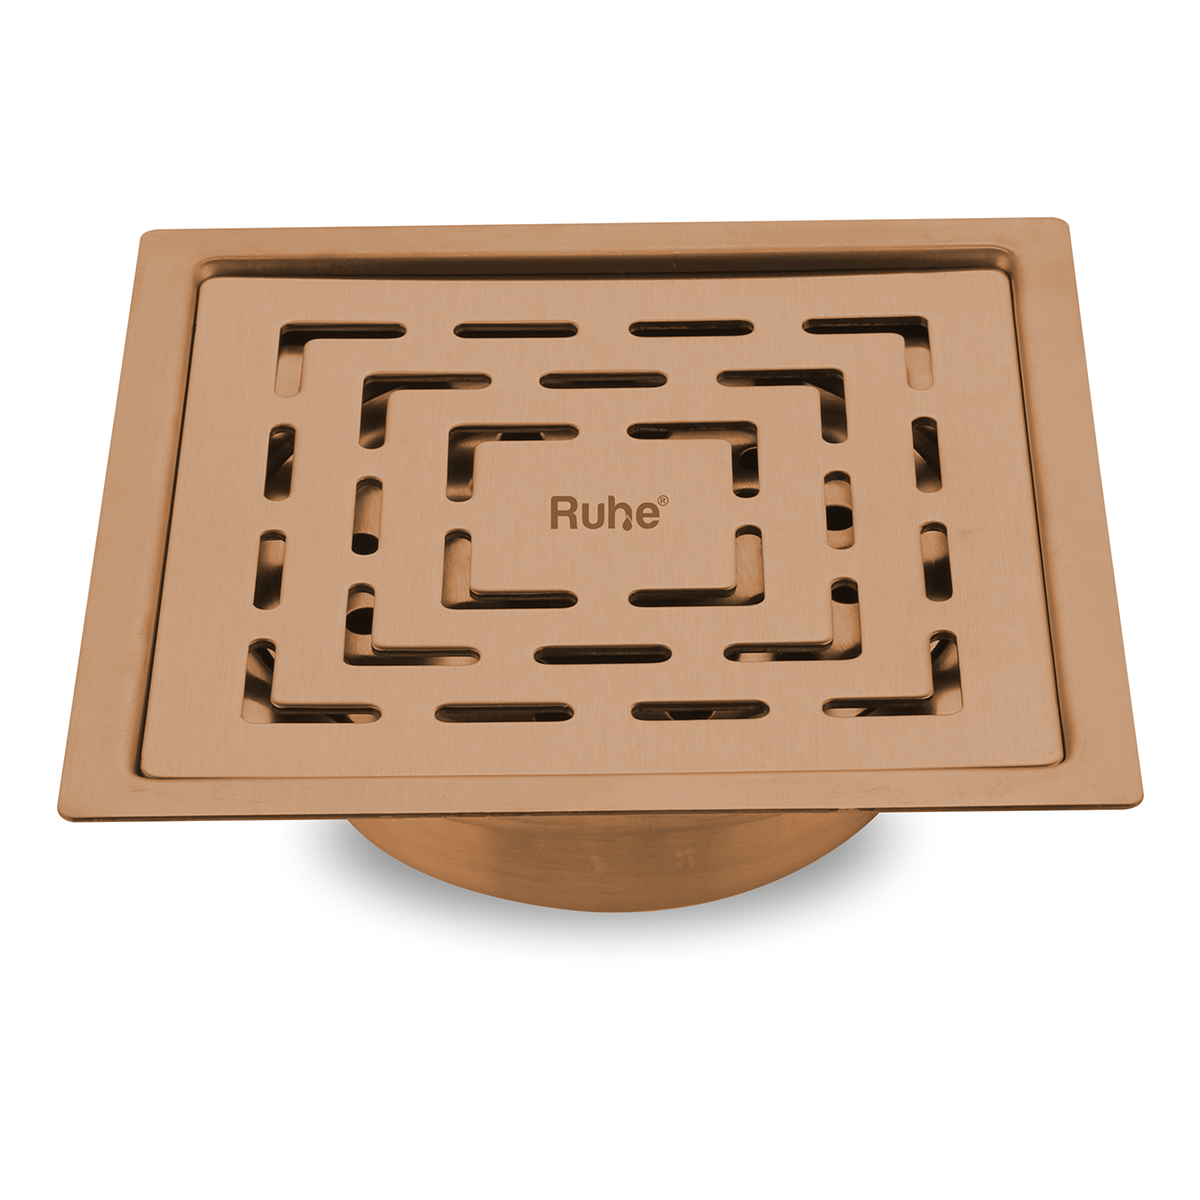 Sapphire Square Flat Cut Floor Drain in Antique Copper PVD Coating (5 x 5 Inches)